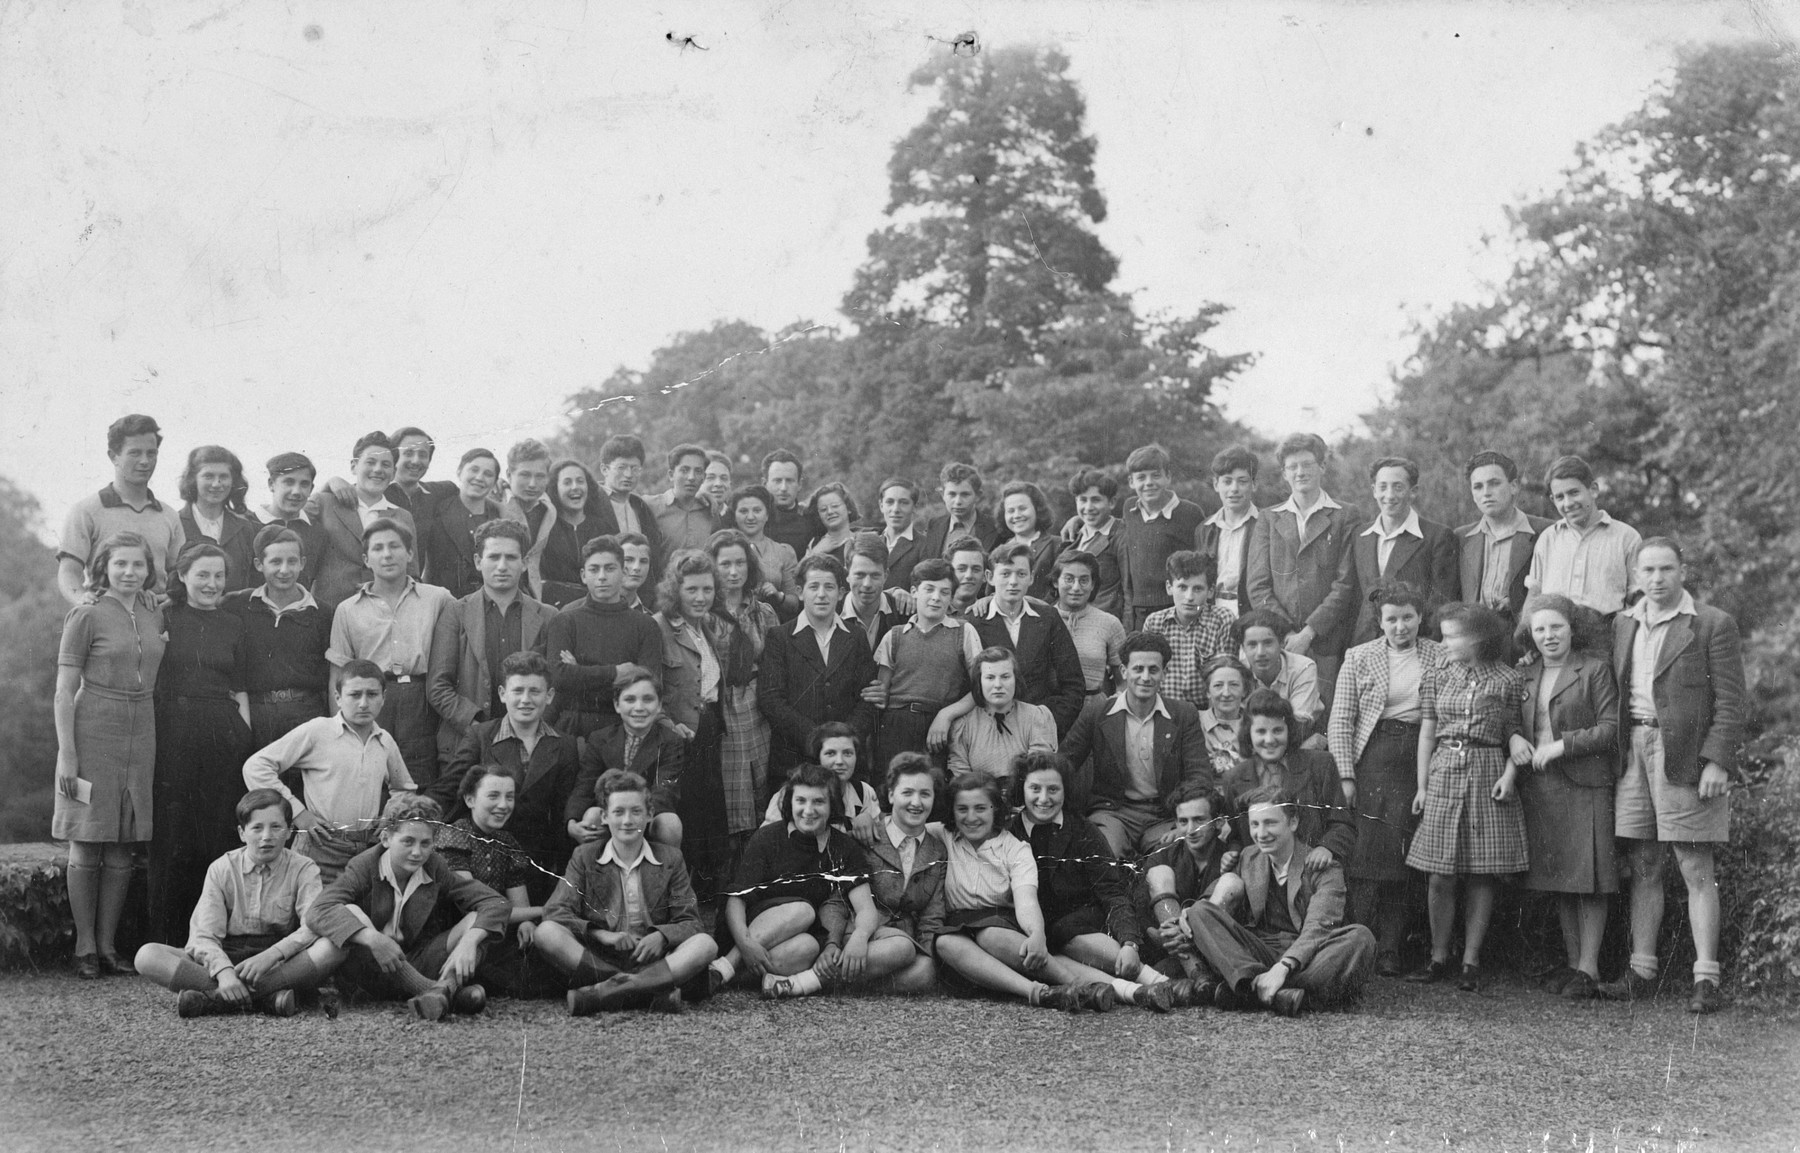 Group portrait of Jewish teenagers, who came to England on a Kindertransport, at a Zionist hachshara in Great Engeham Farm, Kent.